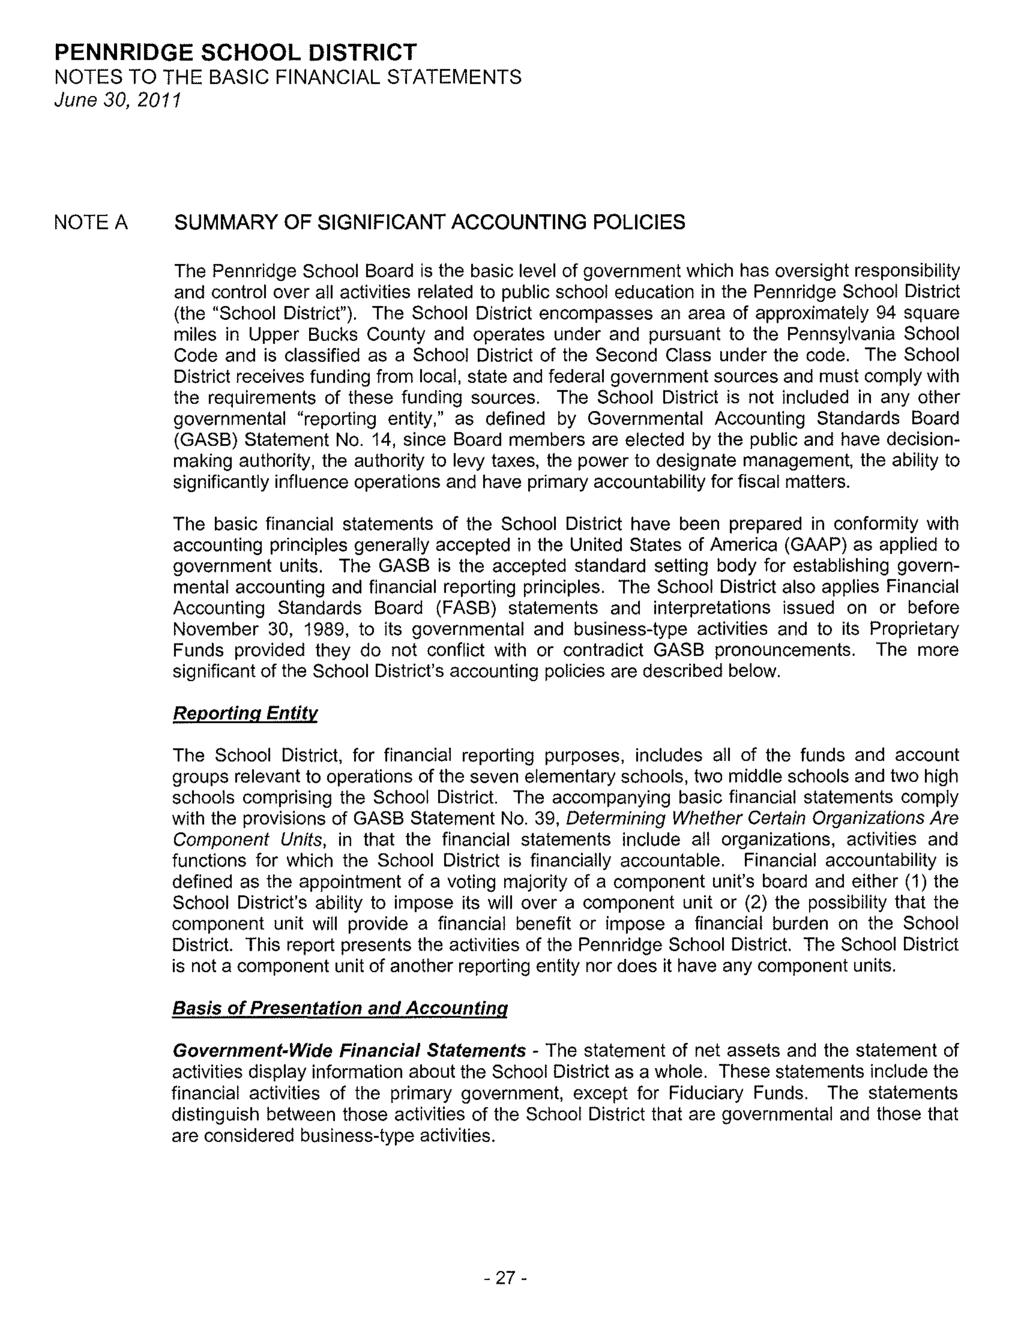 NOTES TO THE BASIC FINANCIAL STATEMENTS June 30, 2011 NOTE A SUMMARY OF SIGNIFICANT ACCOUNTING POLICIES The Pennridge School Board is the basic level of government which has oversight responsibility